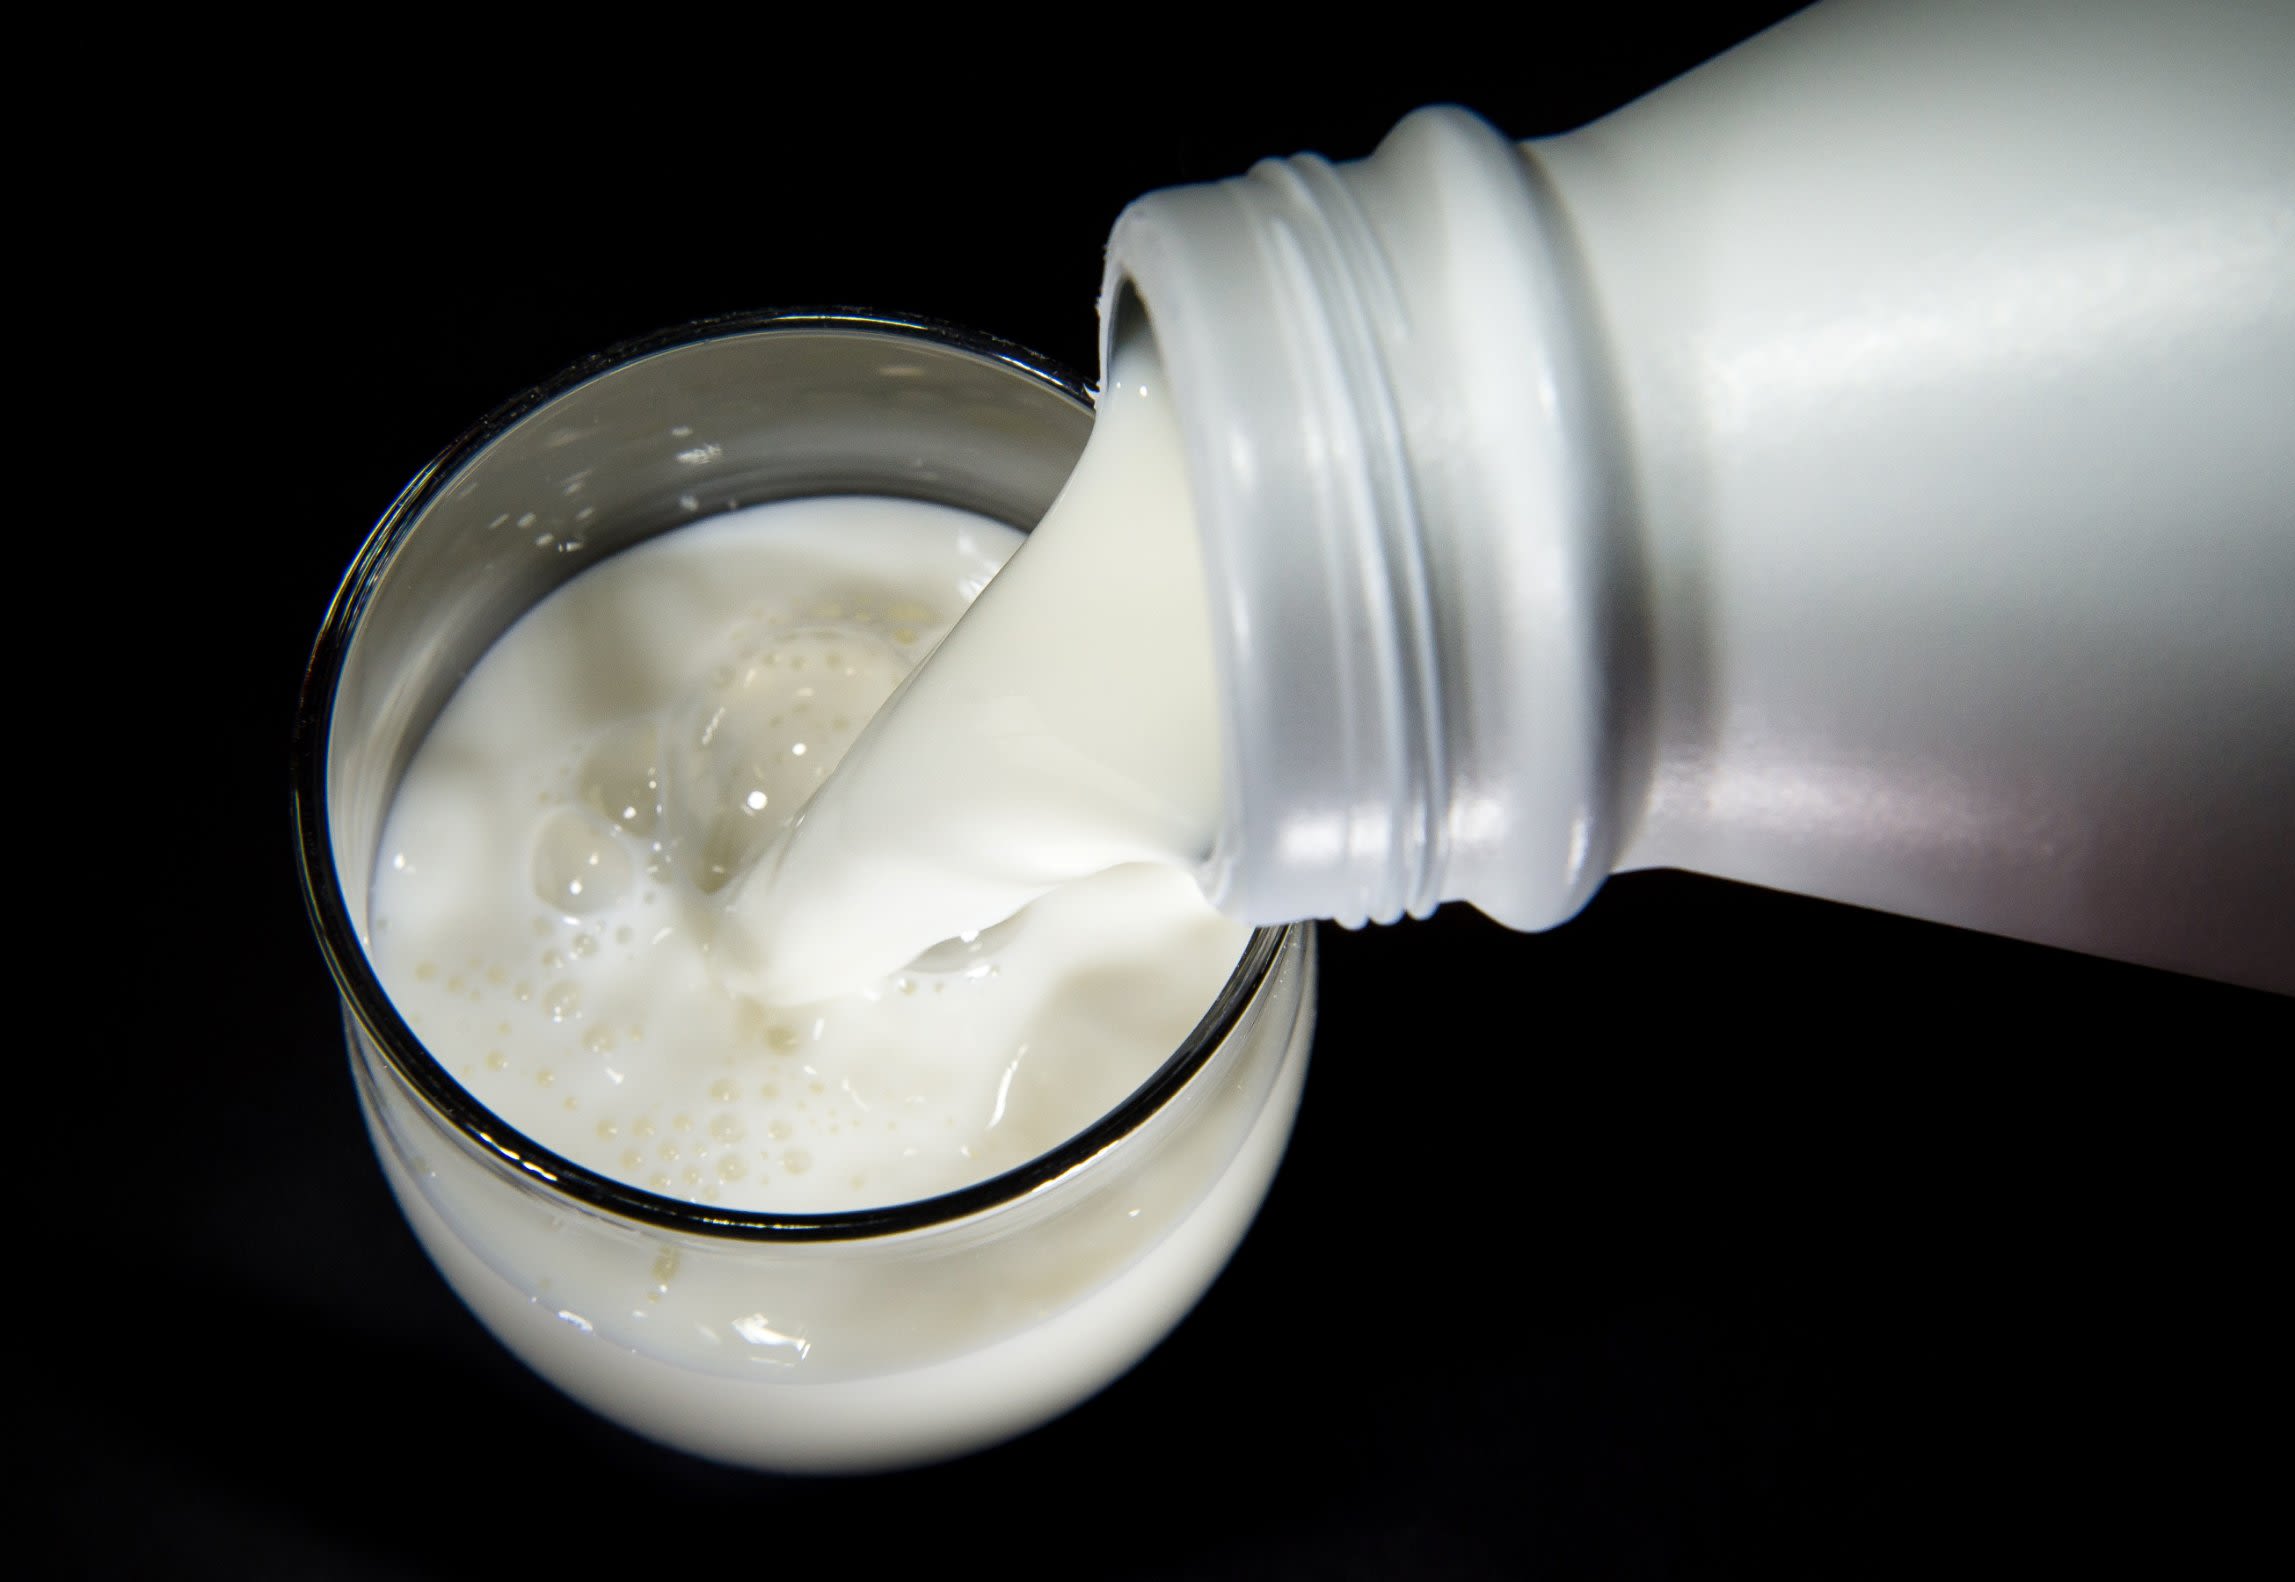 NUTRITION ED: How Much Milk Should My Child Drink? What Kind of